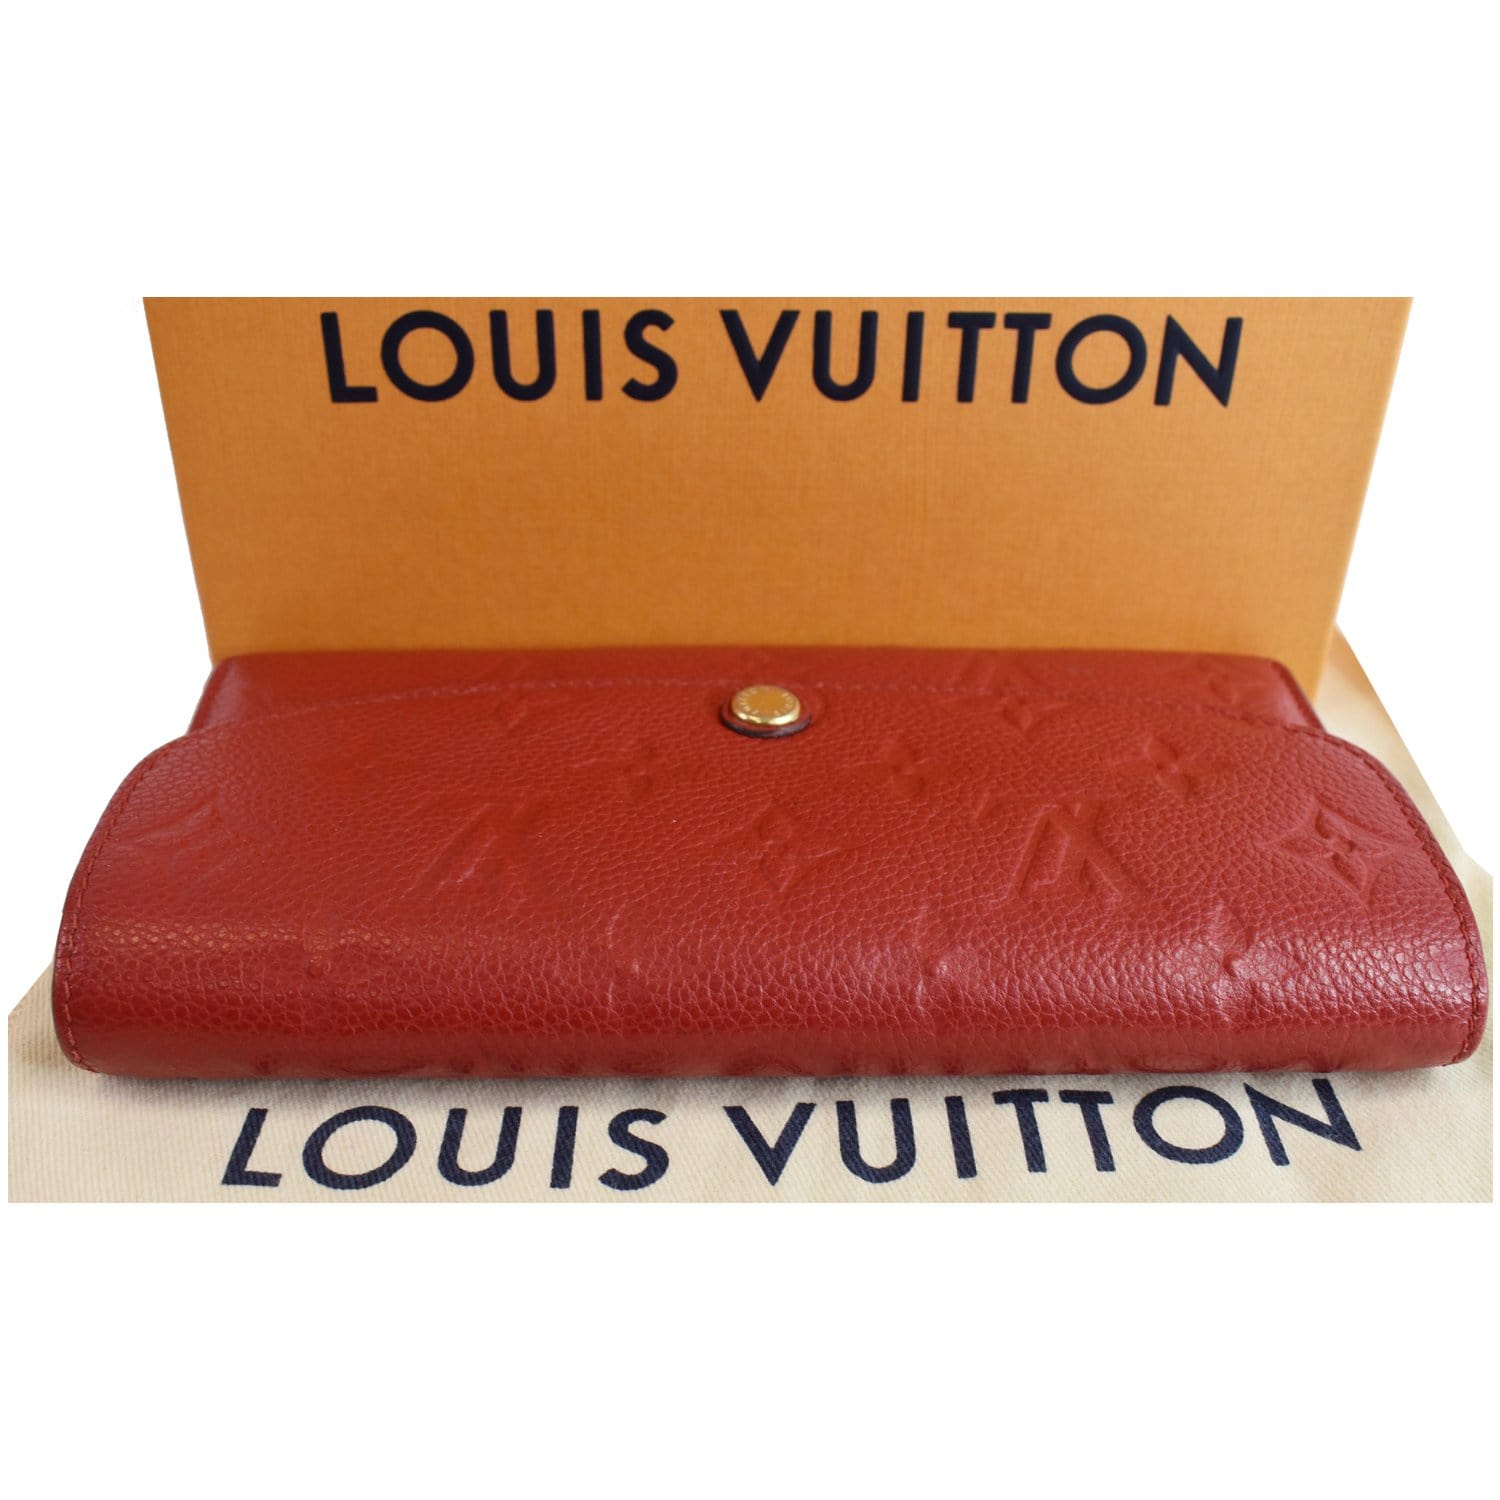 Louis Vuitton Emilie Wallet Monogram Red – Coco Approved Studio